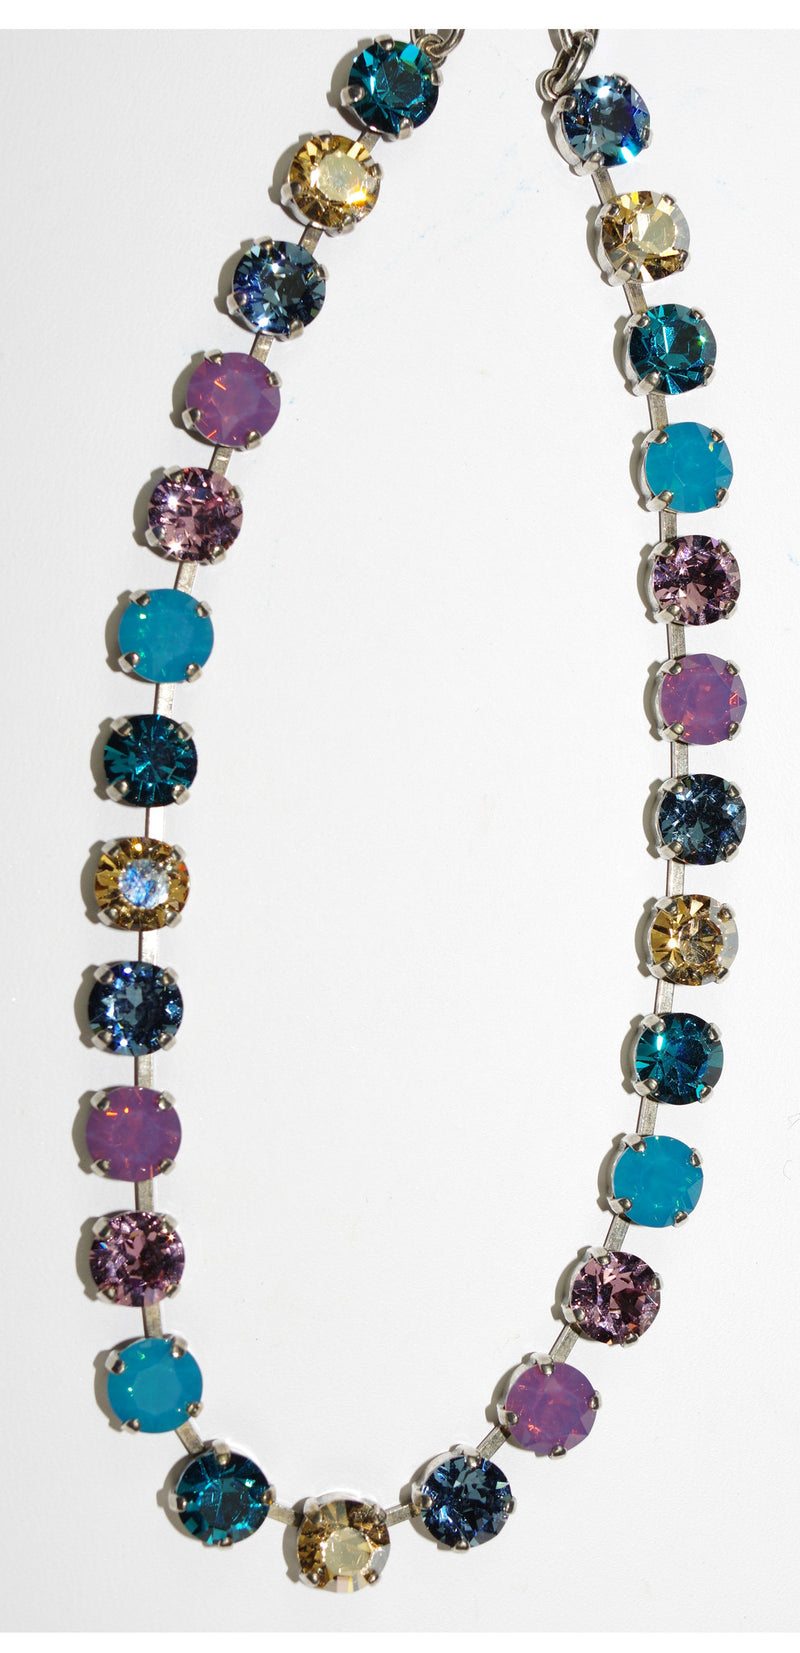 MARIANA NECKLACE BETTE SERENE: blue, pink, lavender, amber stones in silver setting, adjustable chain